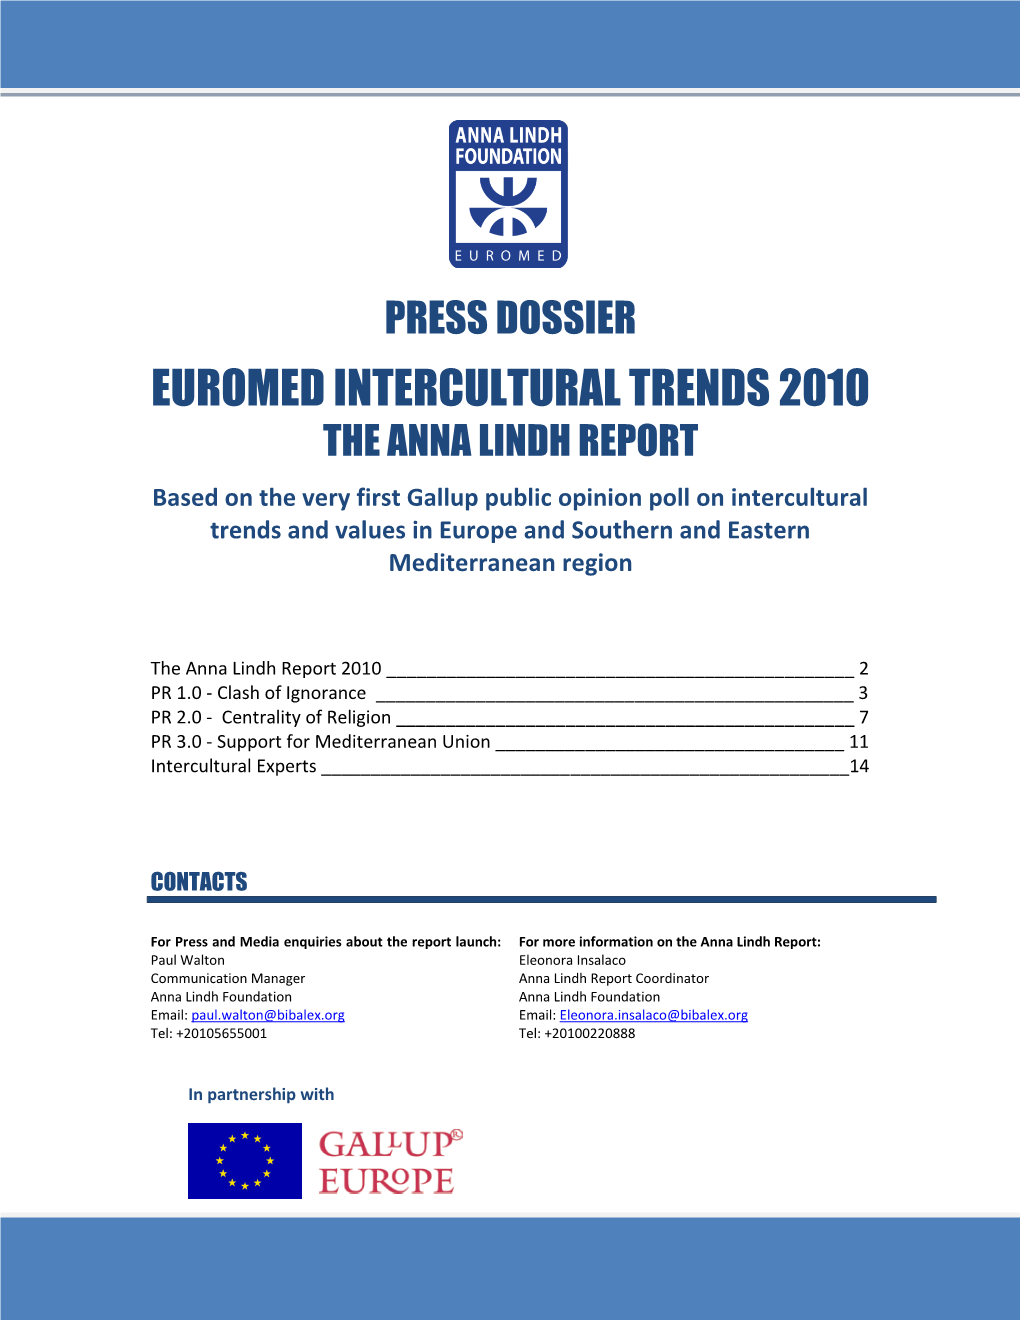 Euromed Intercultural Trends 2010 the Anna Lindh Report